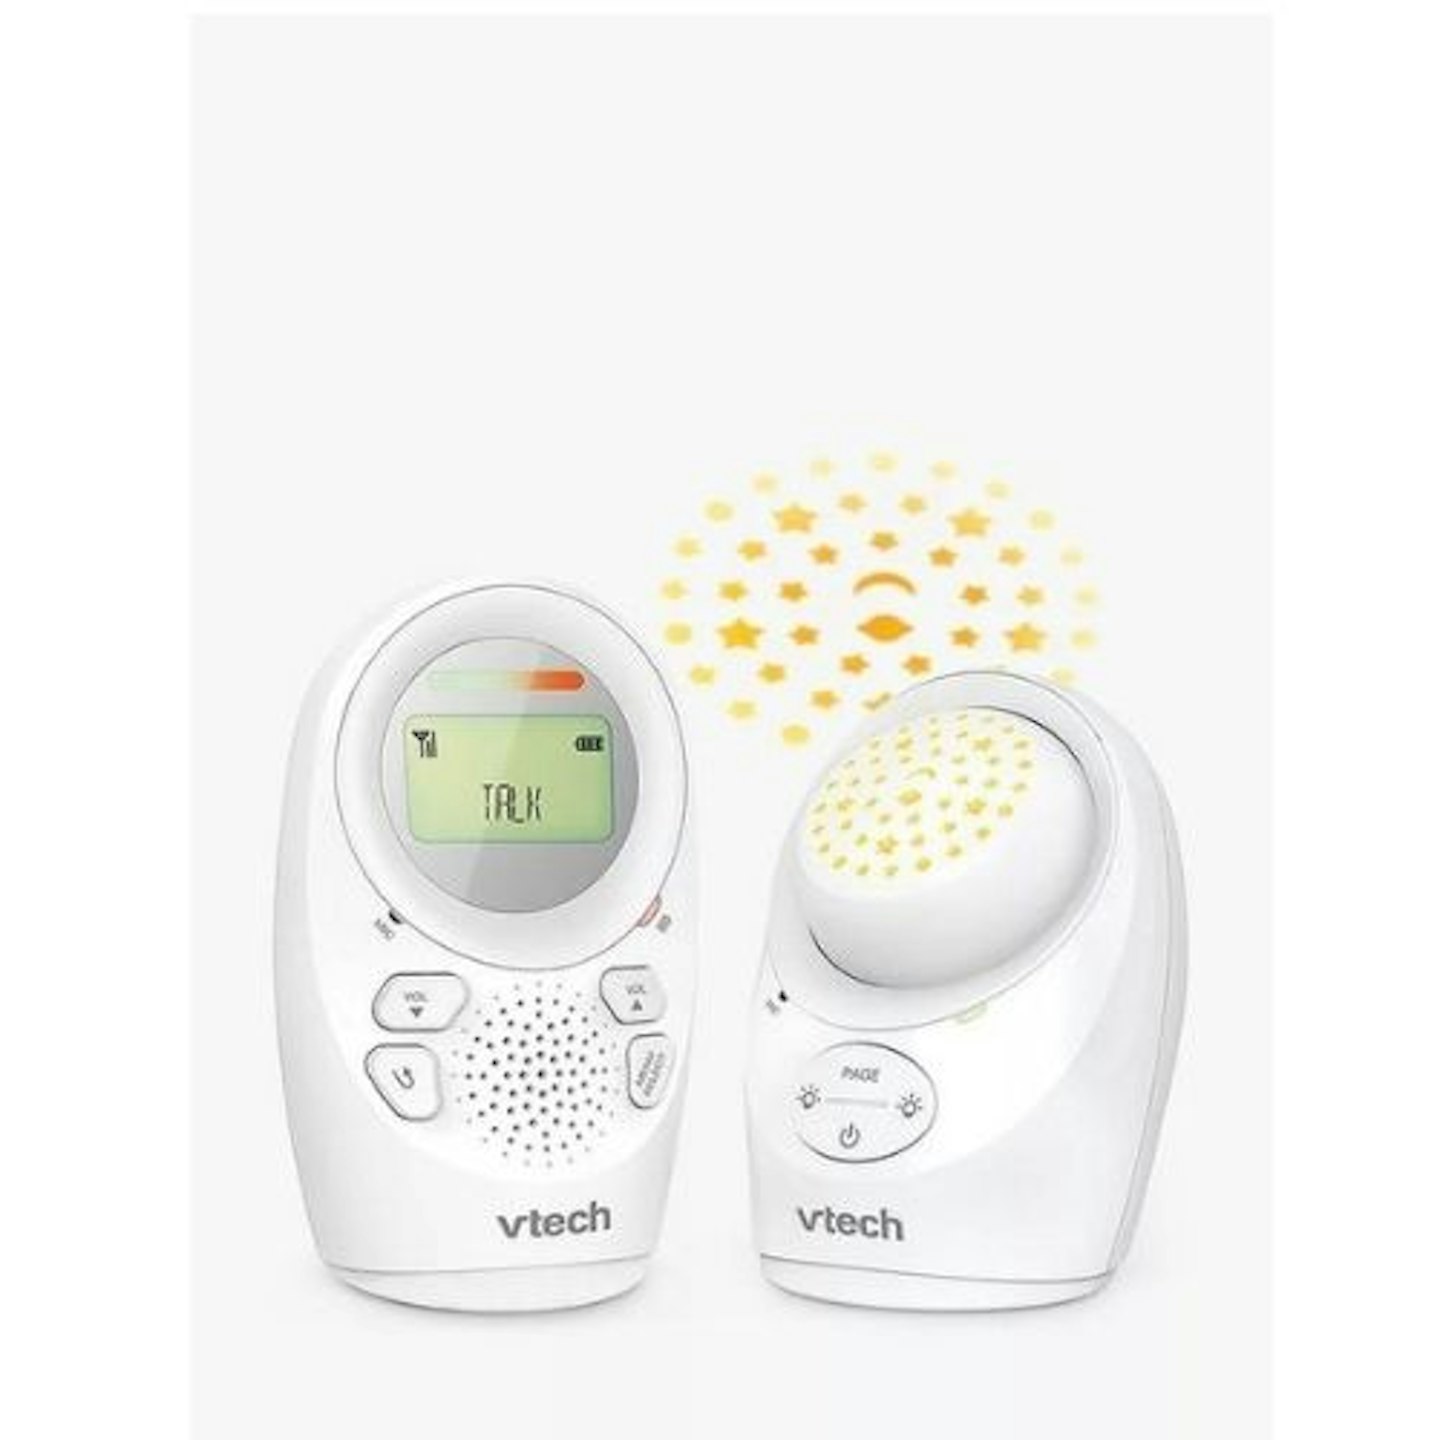 Best cheap baby monitors  - VTech DM1212 Digital Audio Monitor with Night Light & Projection